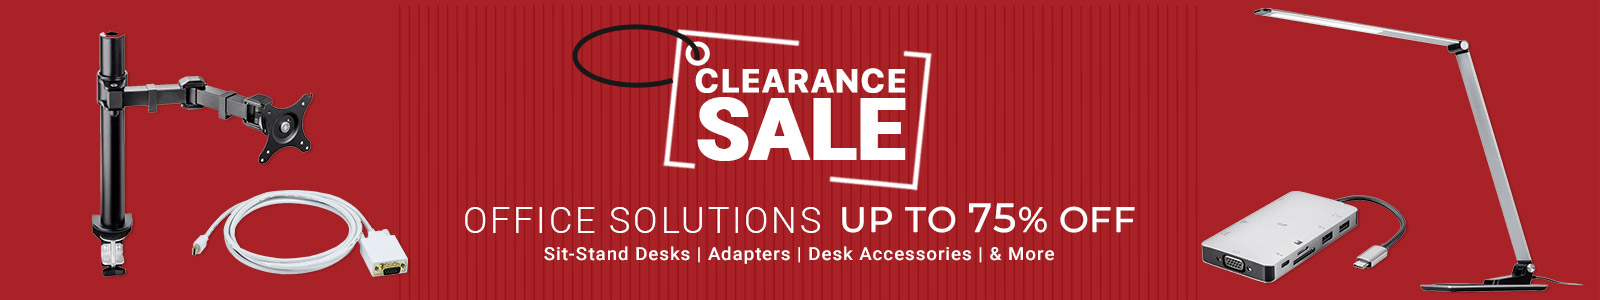 Clearance Sale
Office Solutions
Up to 75% off
Sit-Stand Desks | Adapters | Desk Accessories | & More
Shop Now